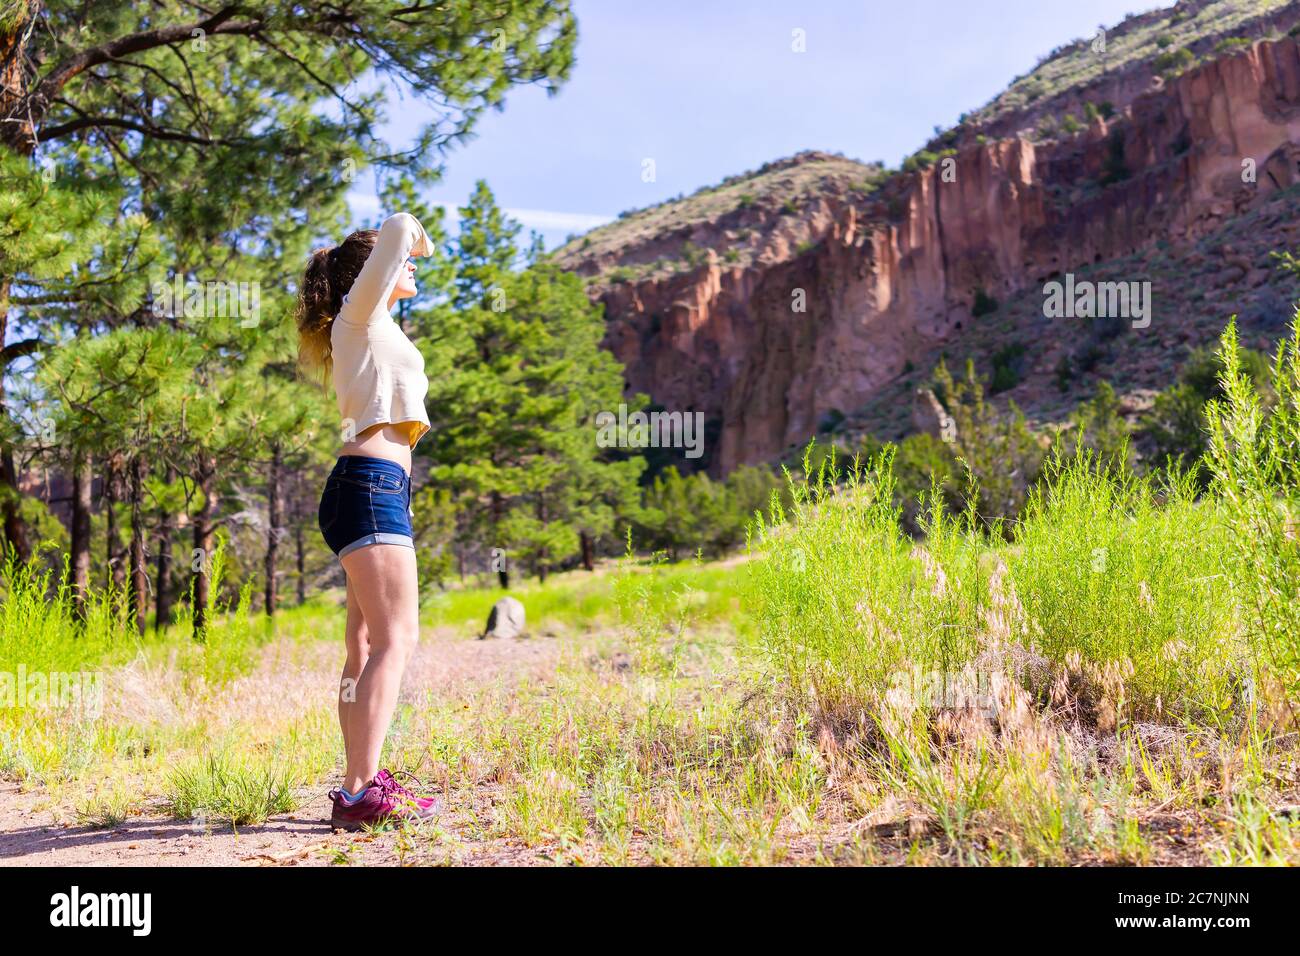 Main Loop trail with woman standing looking up hiking in Bandelier National Monument in New Mexico in Los Alamos with canyon cliffs Stock Photo